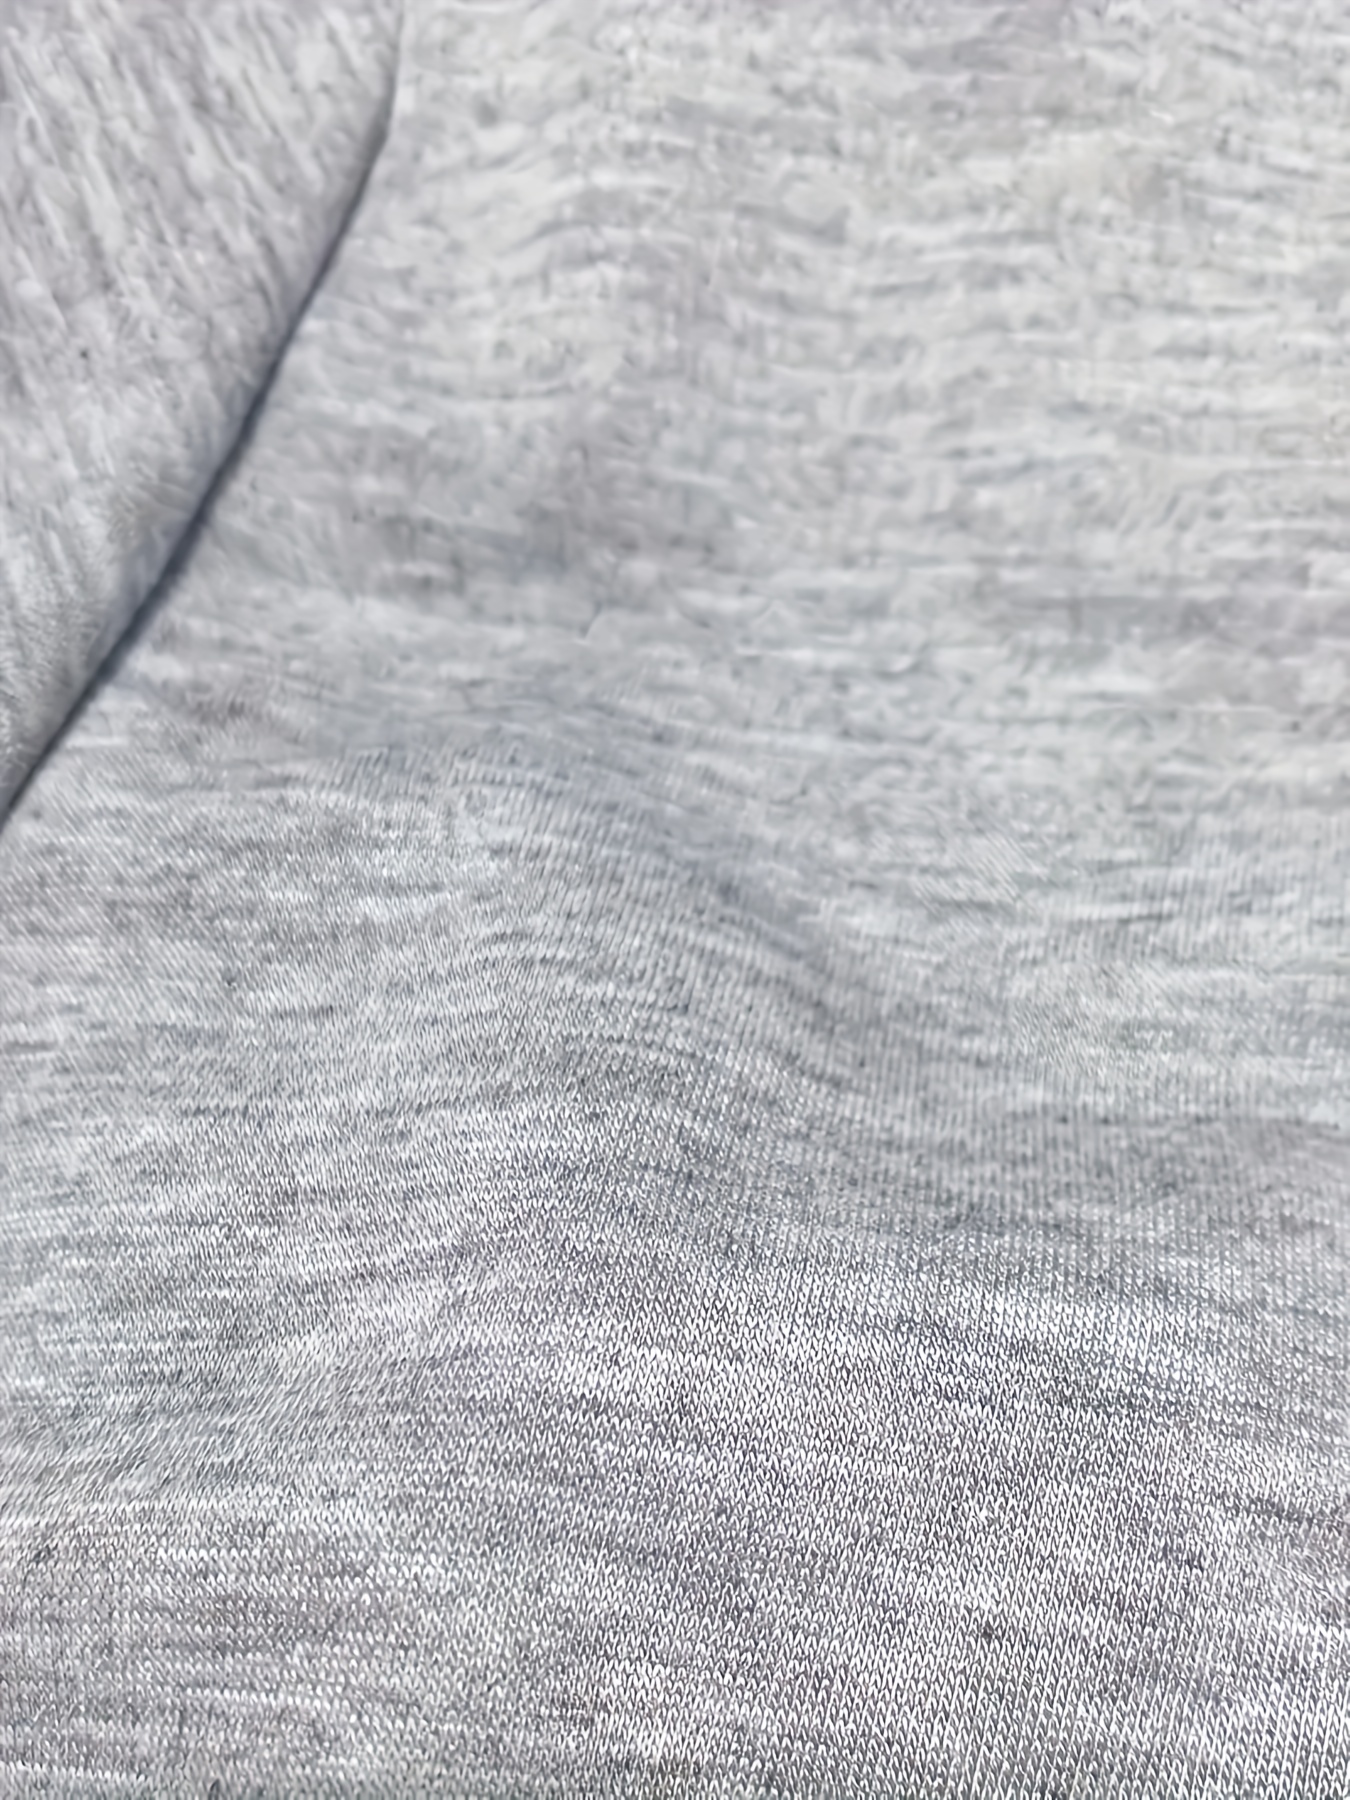 Fine Texture Of Heather Gray Fabric Stock Photo - Download Image